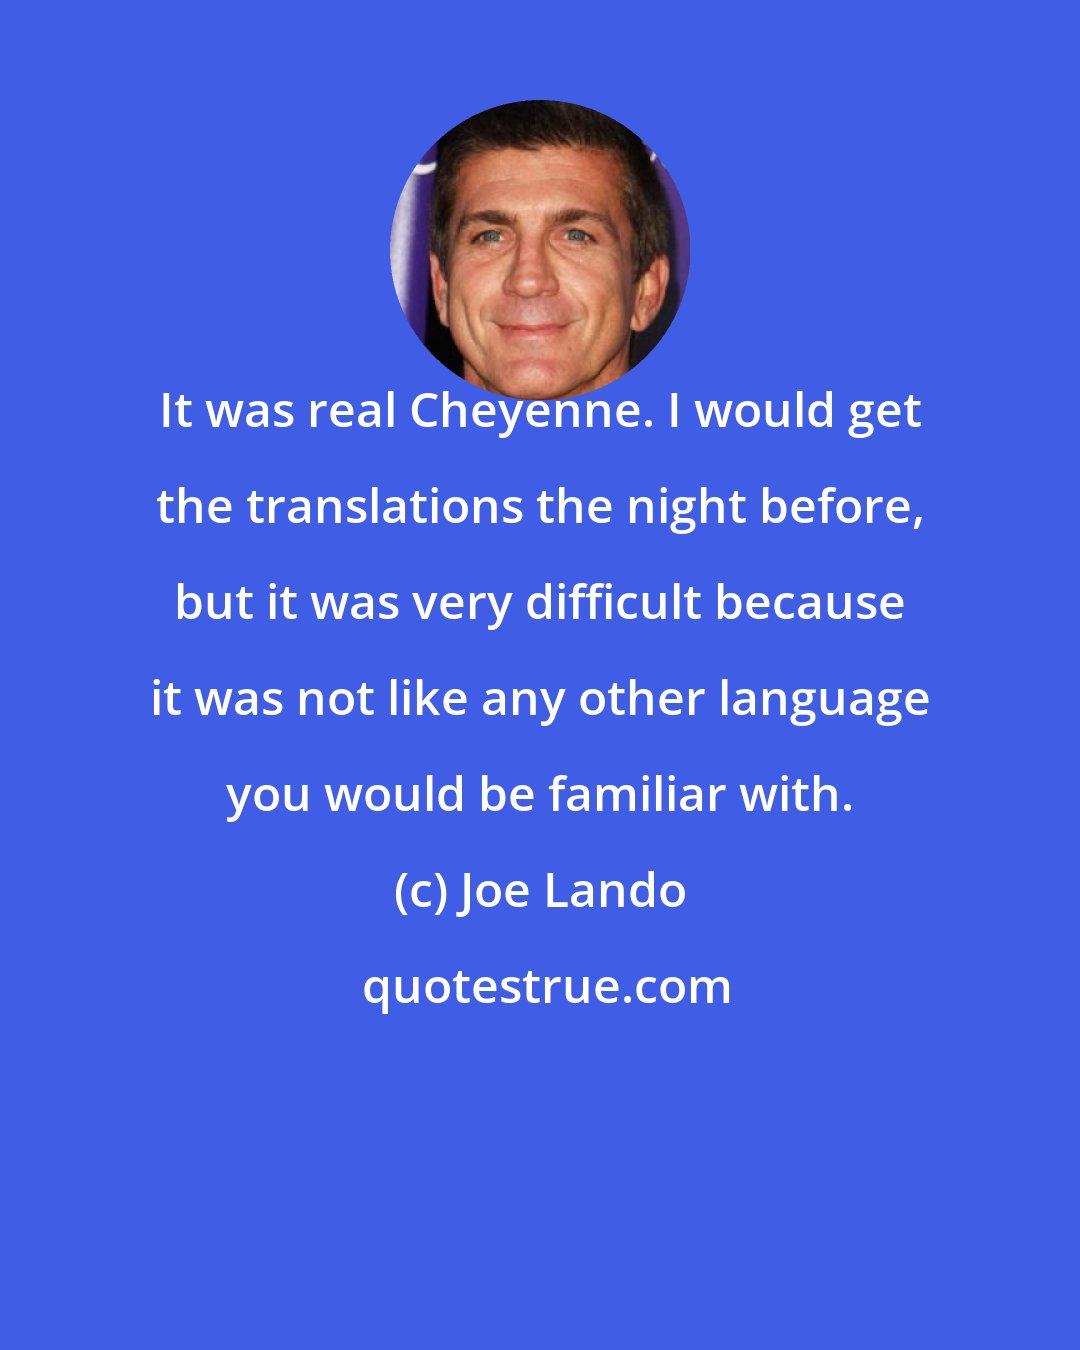 Joe Lando: It was real Cheyenne. I would get the translations the night before, but it was very difficult because it was not like any other language you would be familiar with.